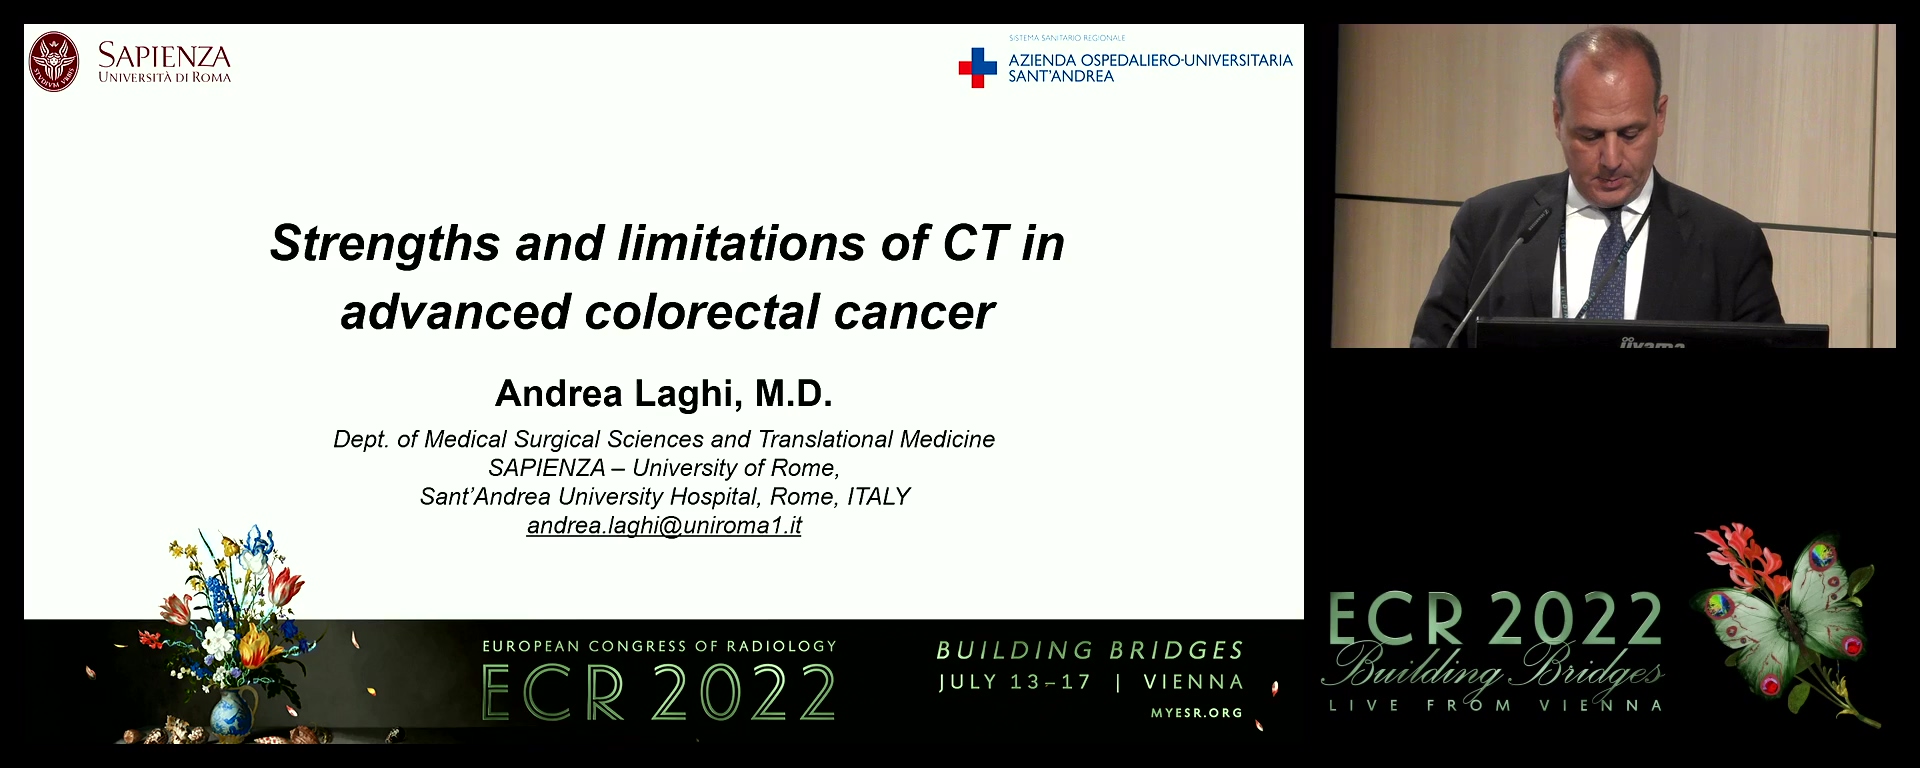 Strengths and limitations of CT in advanced colorectal cancer